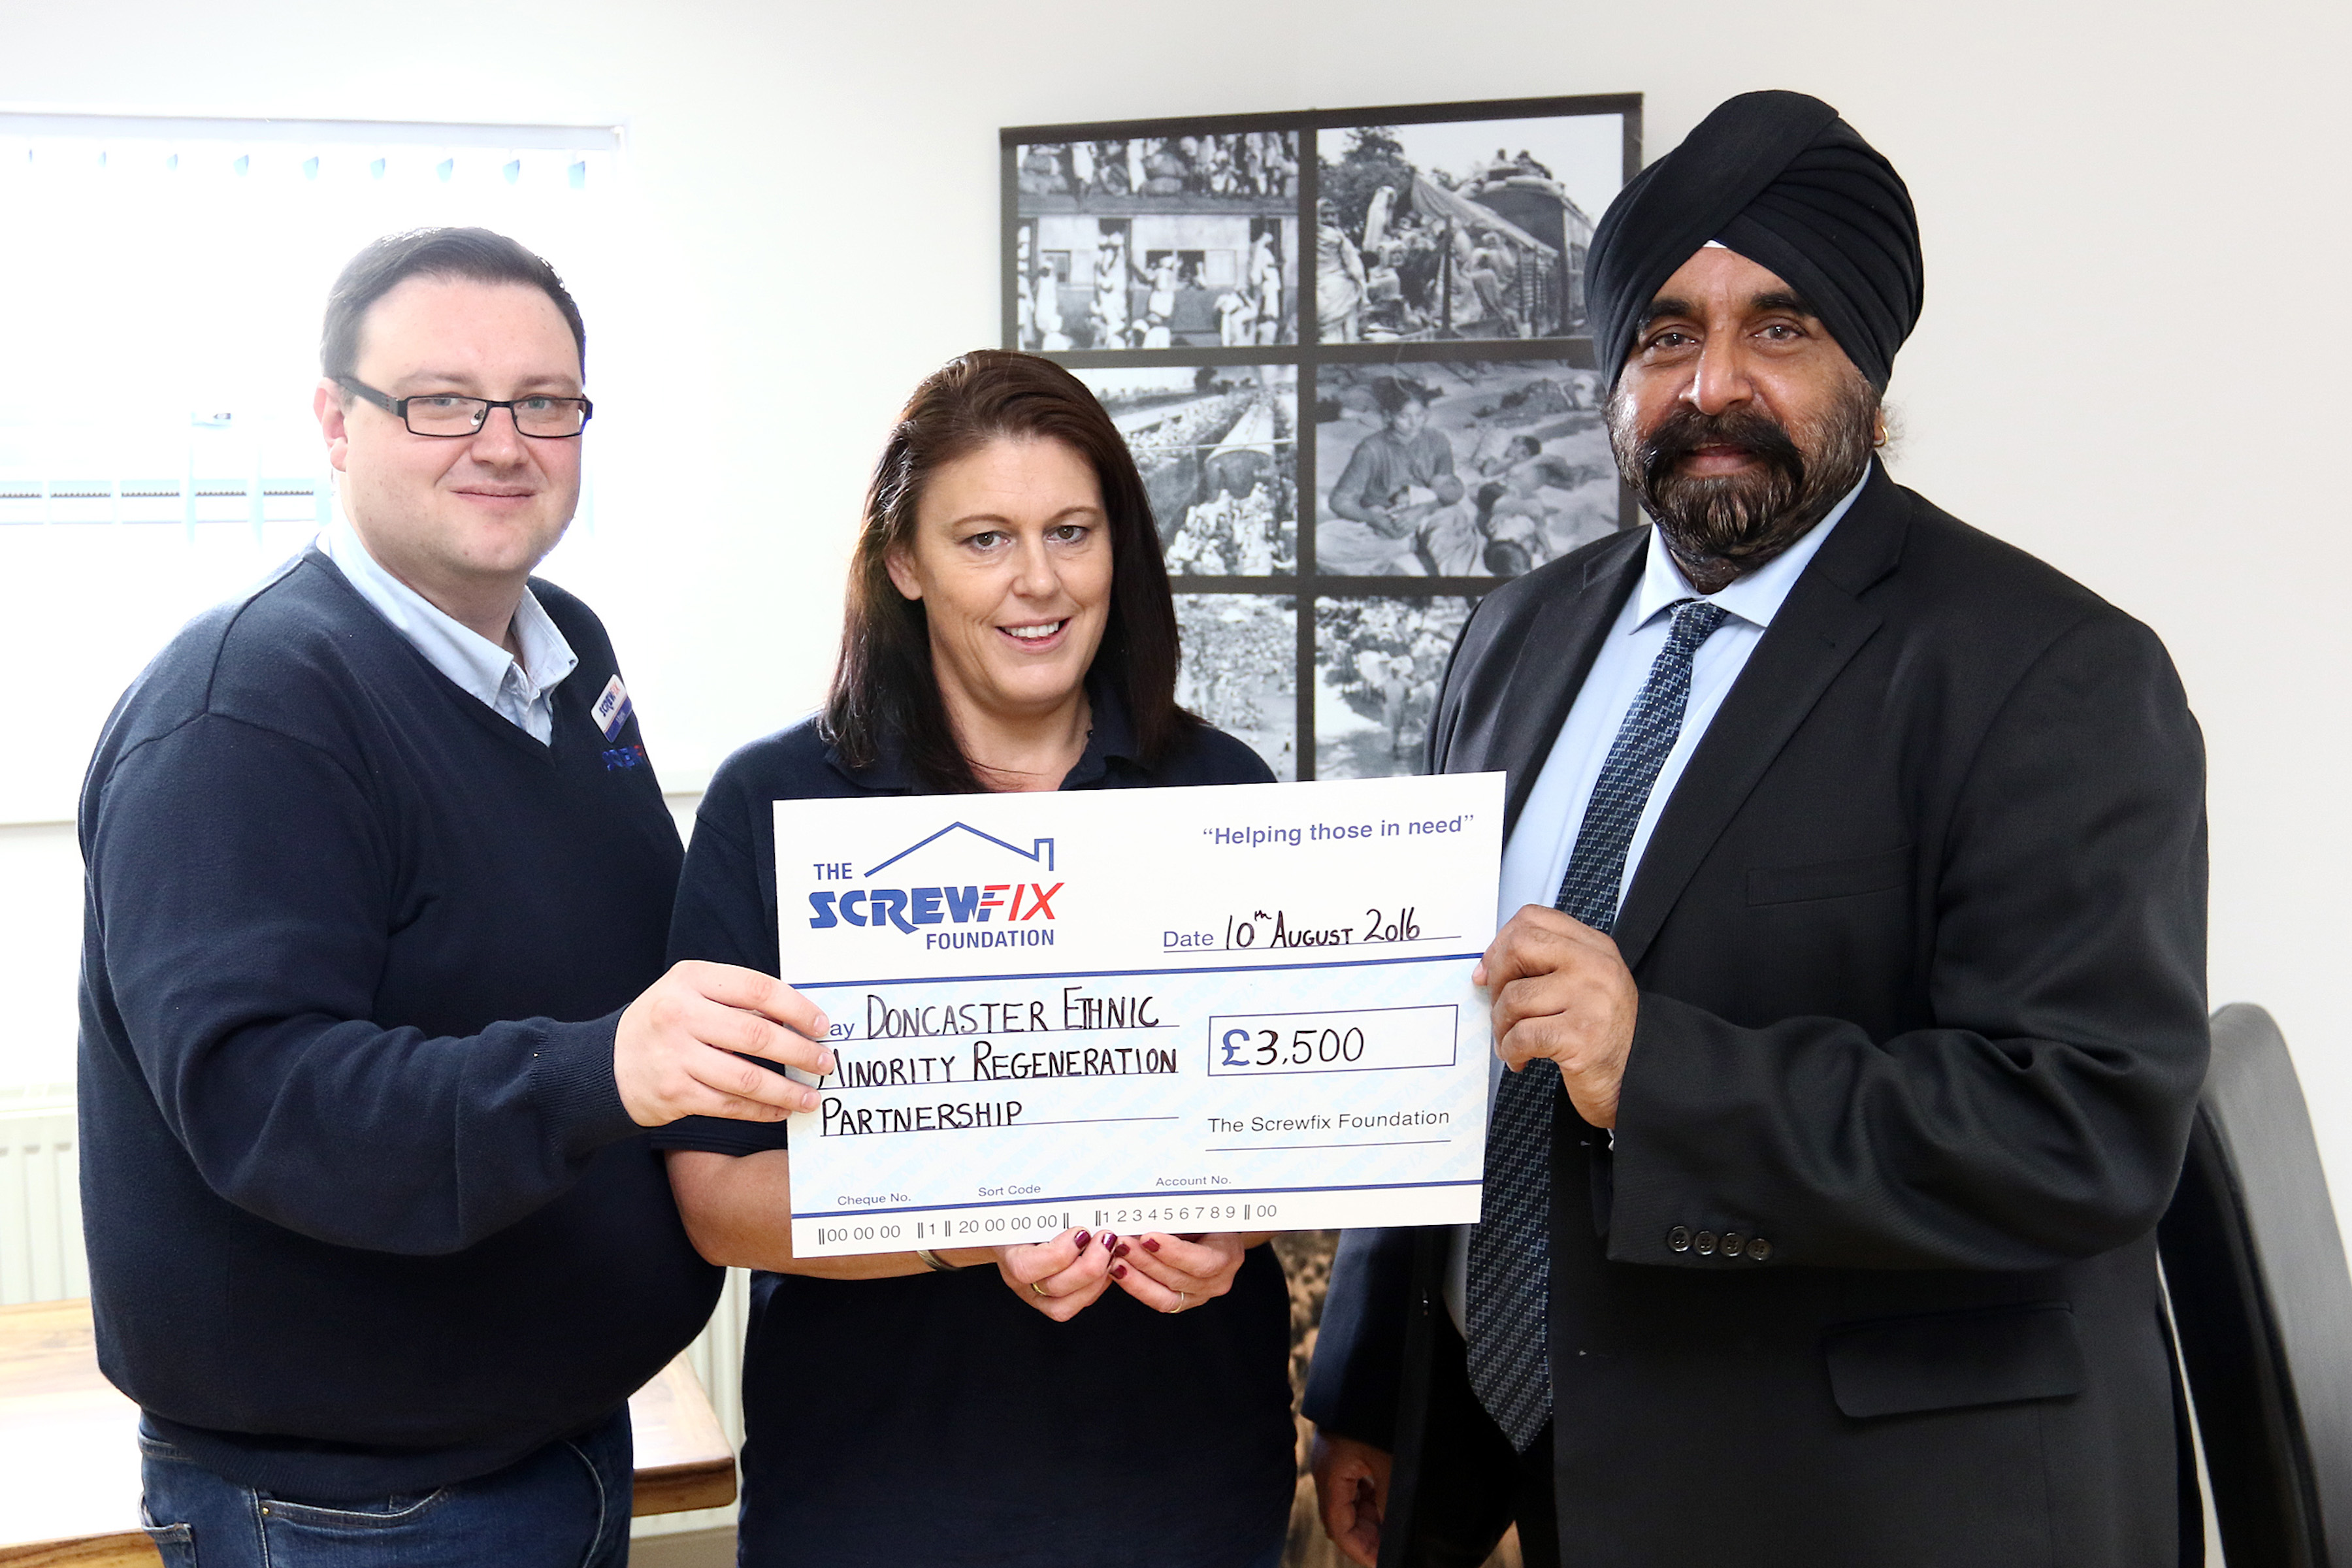 Doncaster based charity gets a helping hand from the Screwfix Foundation